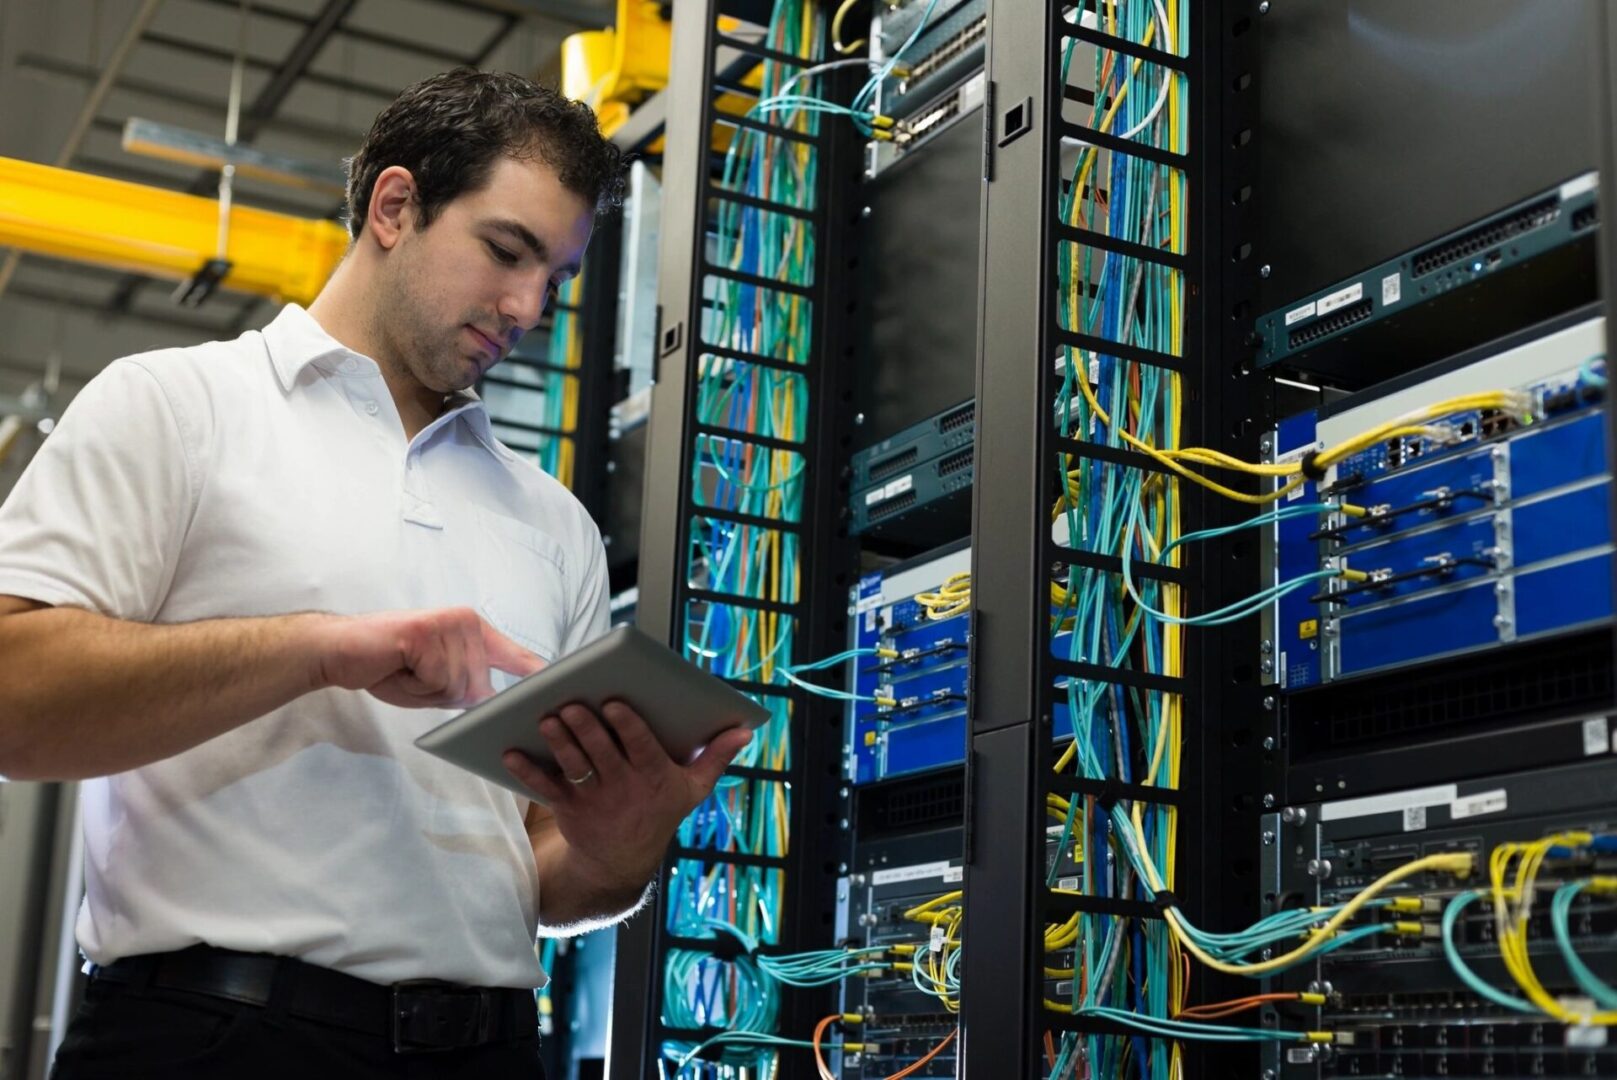 A man holding a tablet in front of server racks.